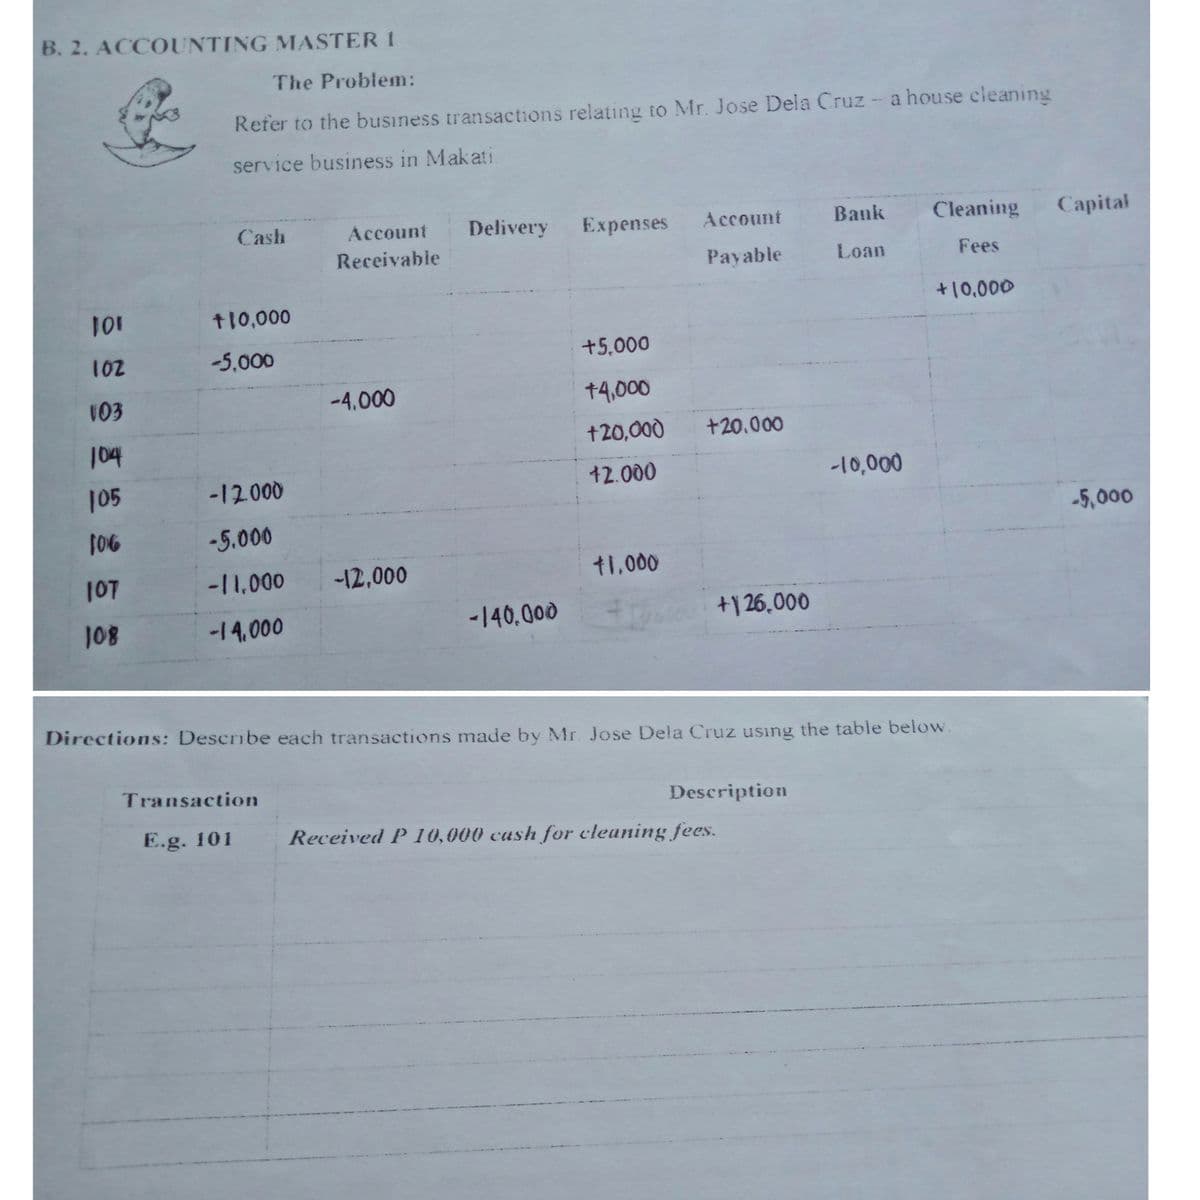 B. 2. ACCOUNTING MASTER 1
The Problem:
Refer to the business transactions relating to Mr. Jose Dela Cruz - a house cleaning
service business in Makati
Cash
Account
Delivery
Expenses
Account
Bauk
Cleaning
Capital
Receivable
Payable
Loan
Fees
101
t10,000
+10,000
102
-5,000
+5,000
103
-4.000
+4,000
104
+20,000
+20.000
105
-12000
12.000
-10,000
-5,000
-5.000
1OT
-11,000
-12,000
t1,000
108
-1 4,000
-140,00
+1 26,000
Directions: Describe each transactions made by Mr. Jose Dela Cruz using the table below.
Transaction
Description
E.g. 101
Received P 10,000 cash for cleaning fees.
